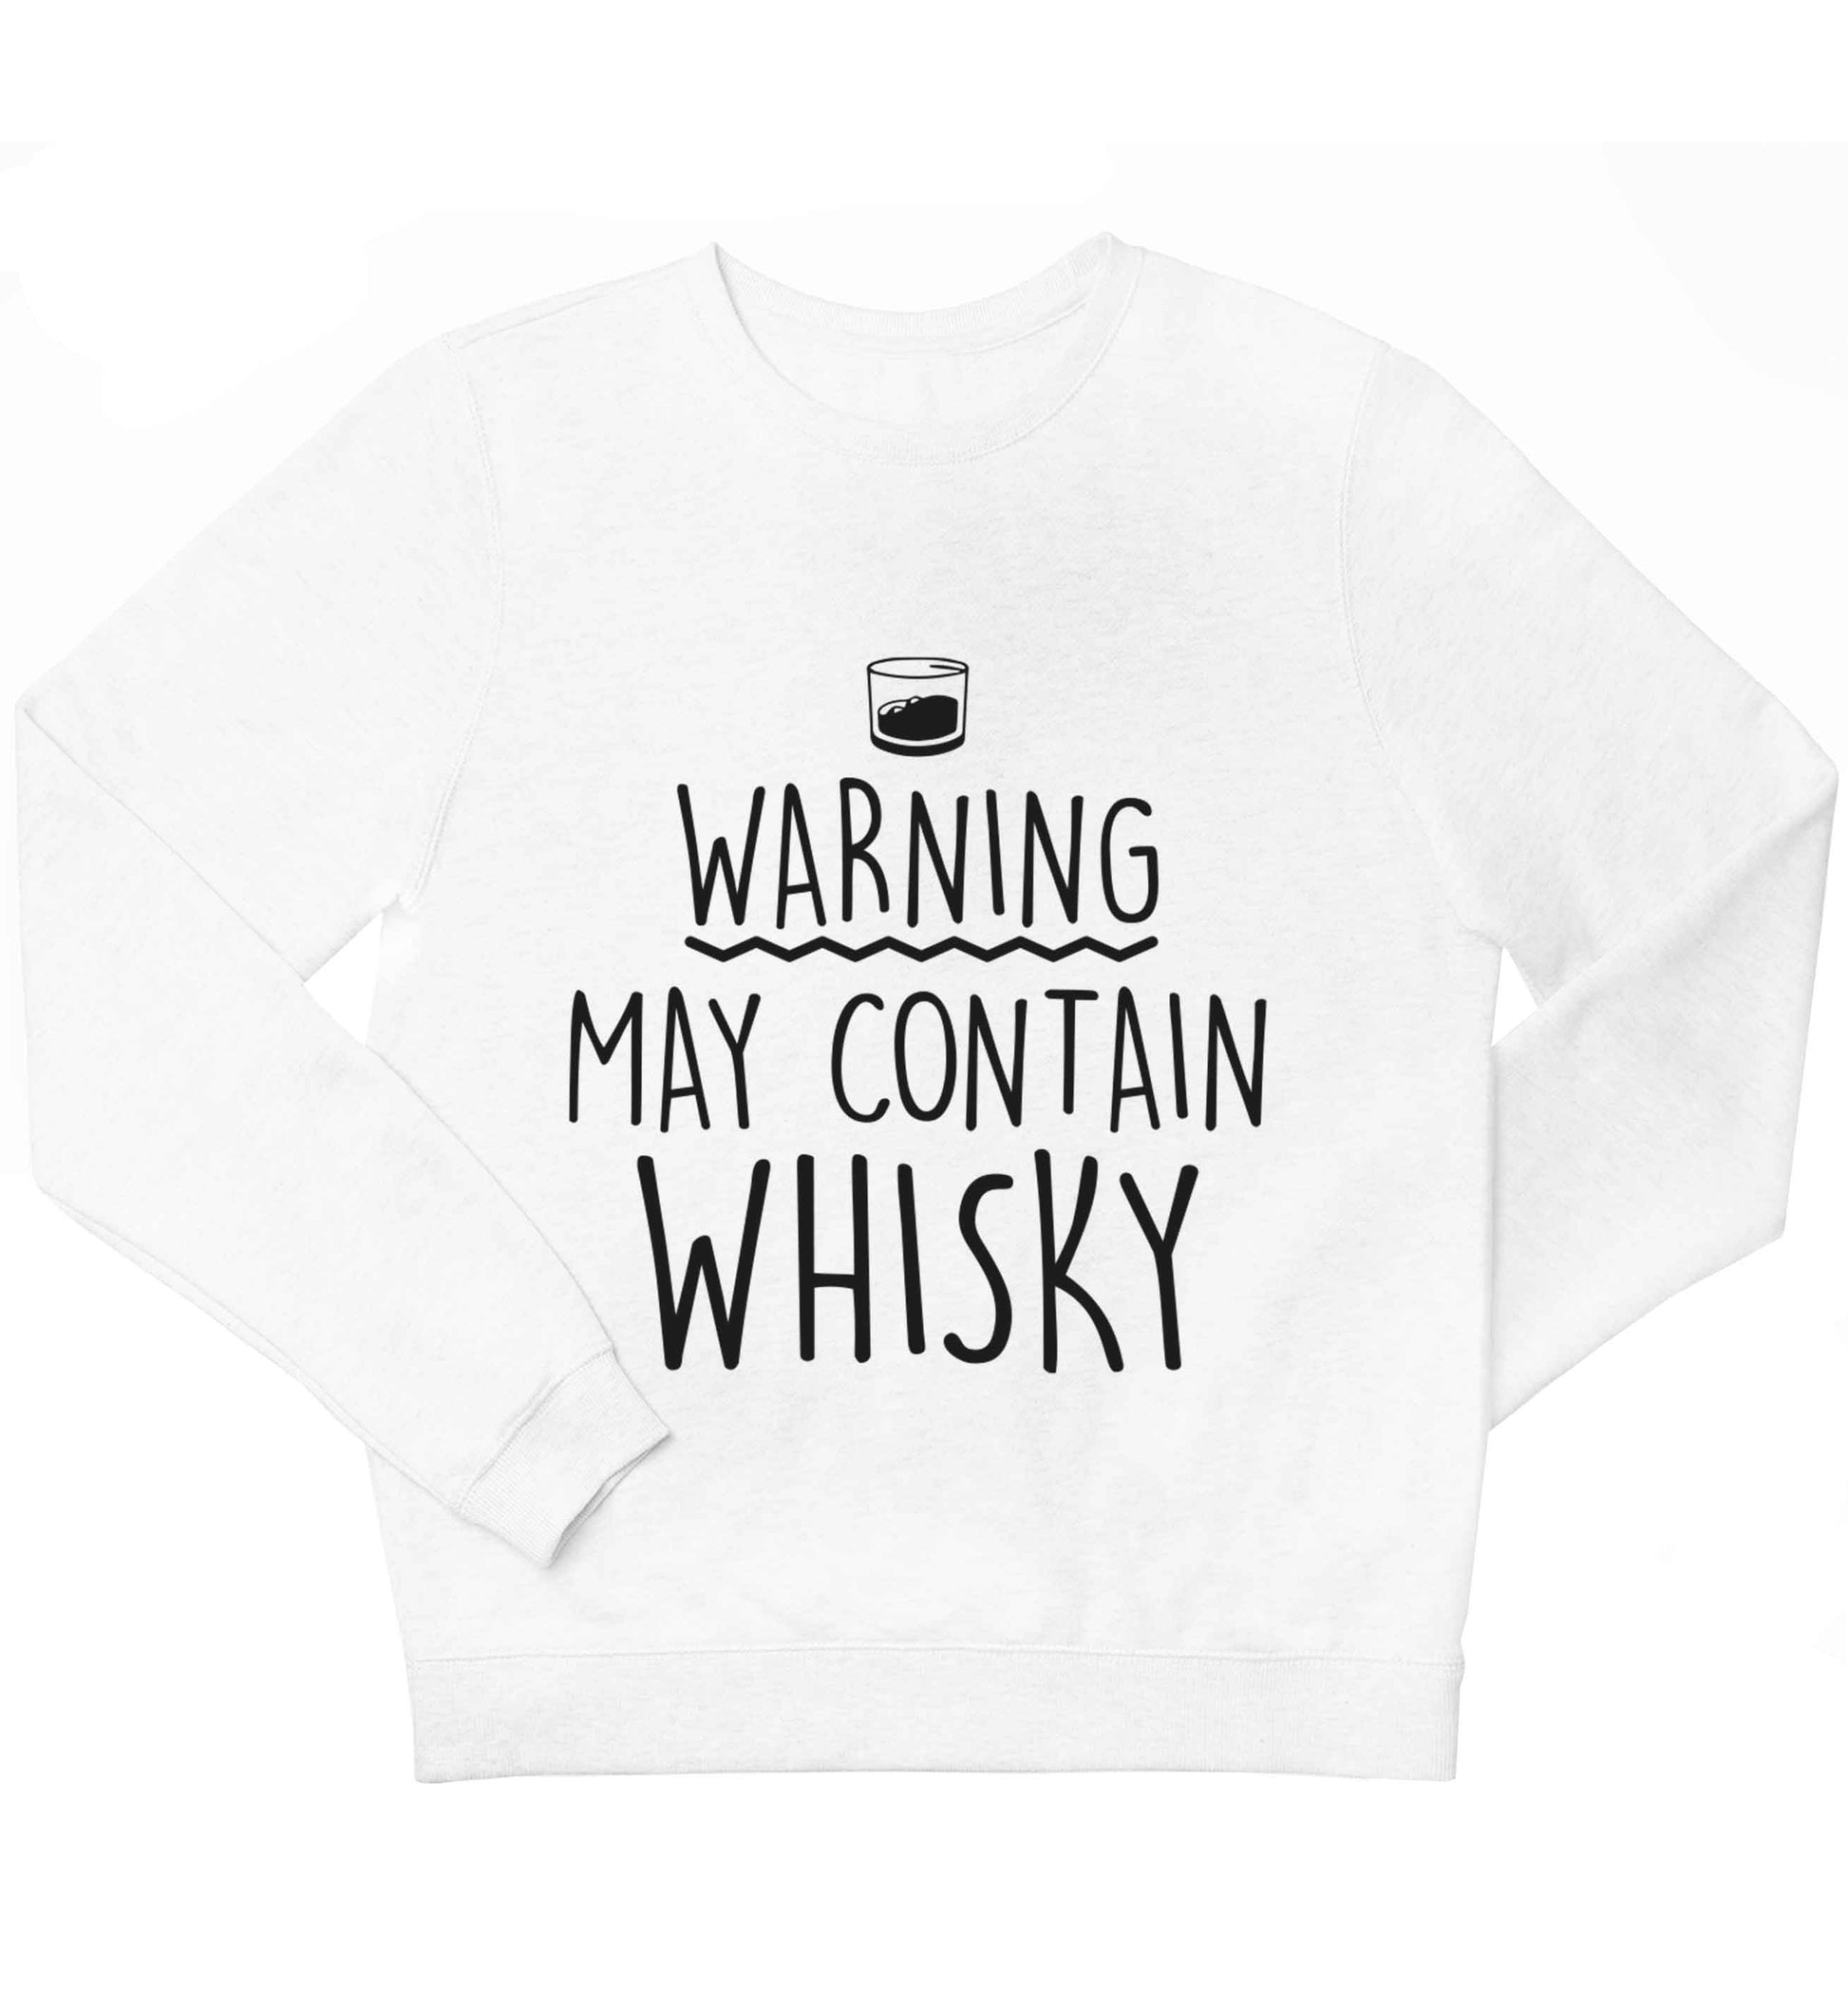 Warning may contain whisky adult's unisex maroon sweater 2XL